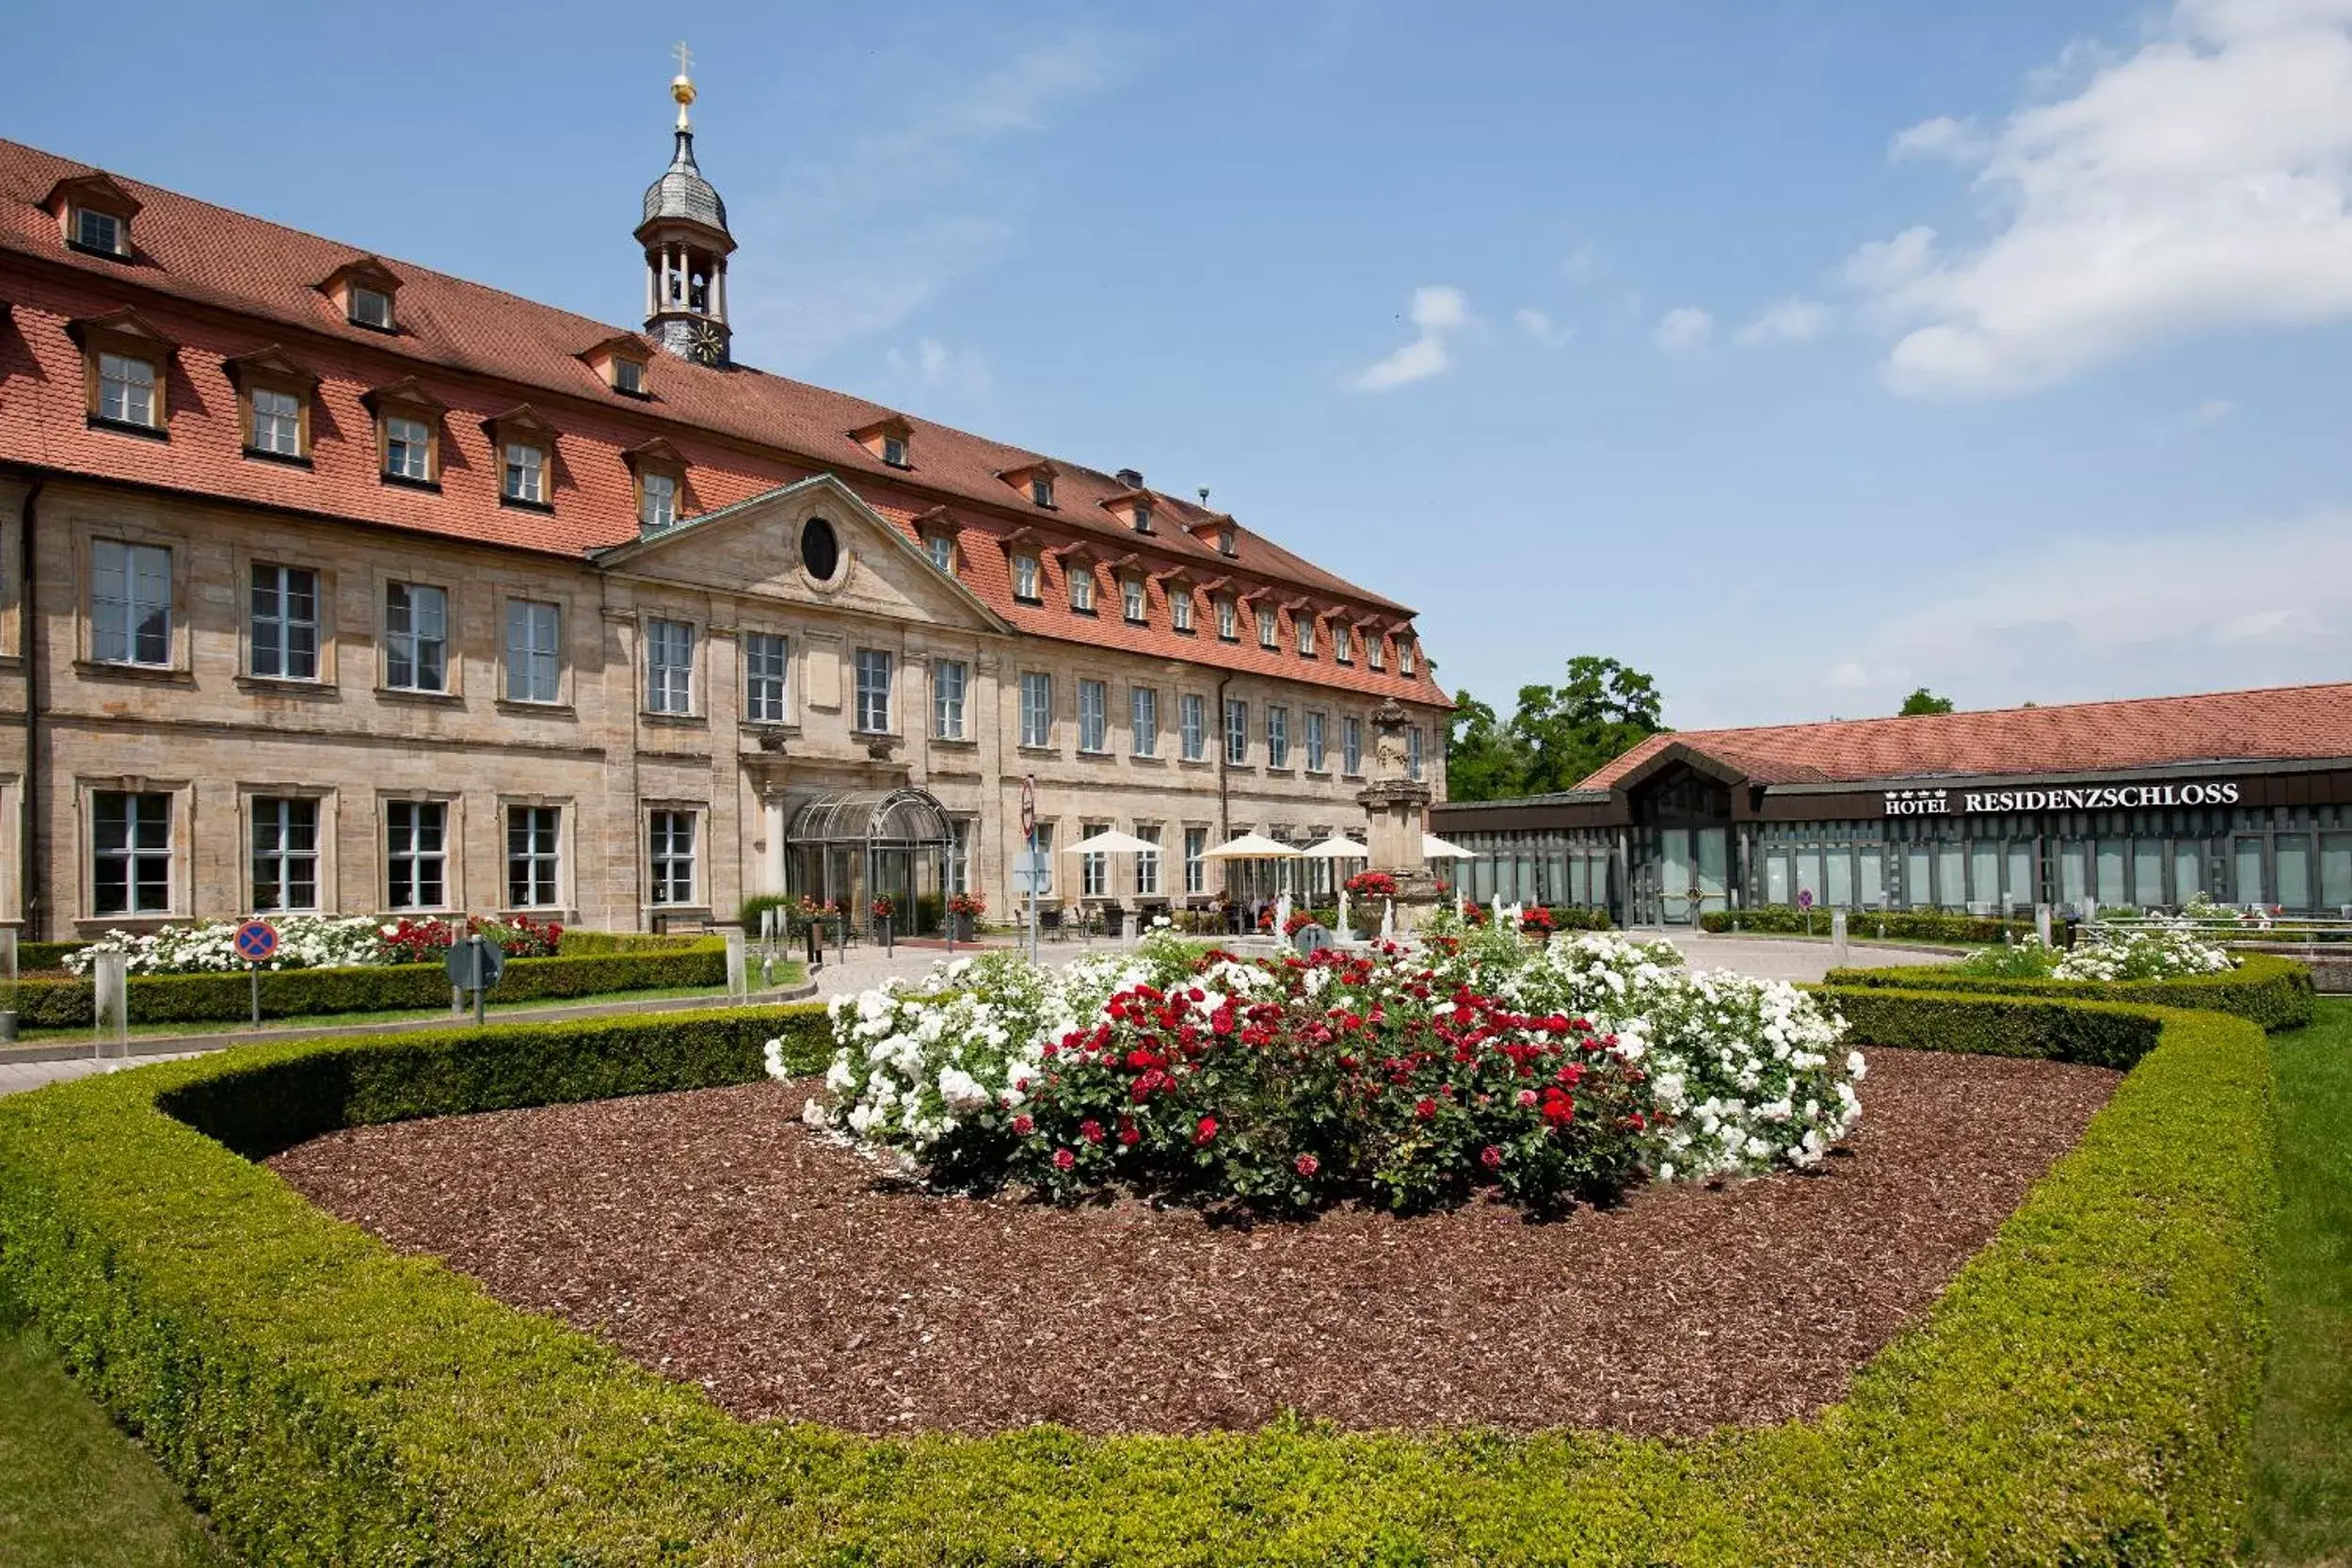 Area and facilities, Property Building in Welcome Hotel Residenzschloss Bamberg